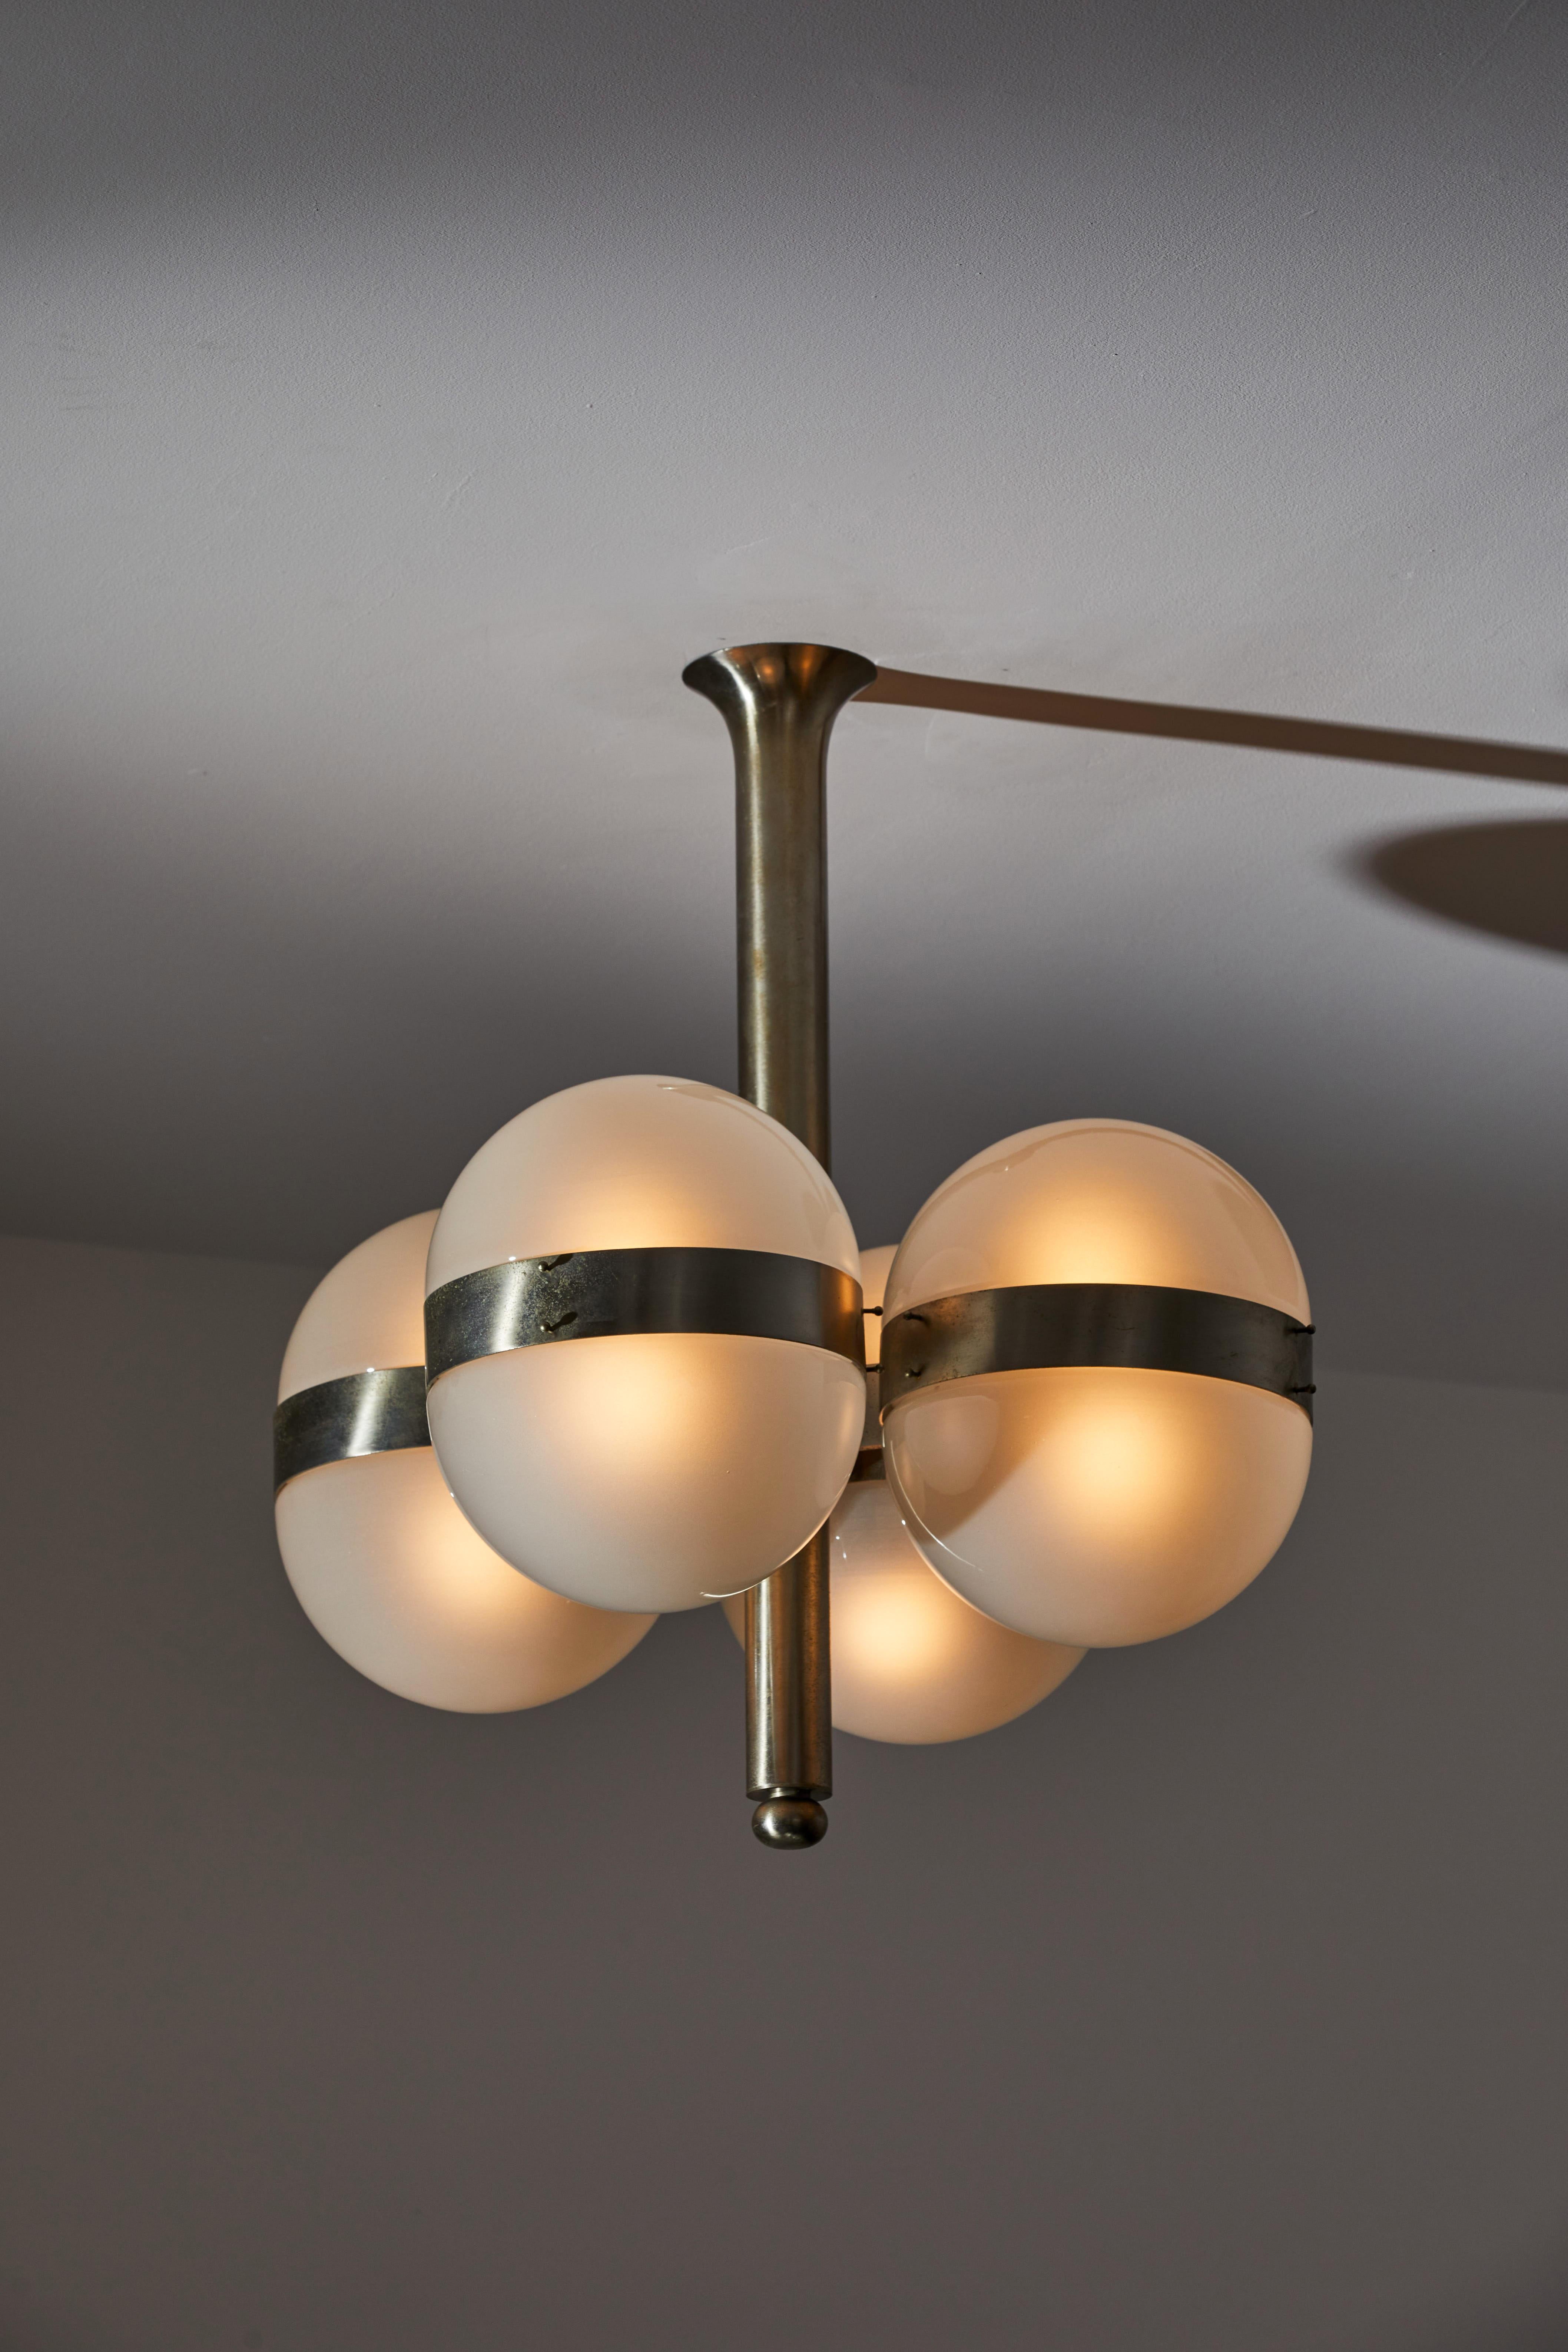 Two Tetraclio suspension lights by Sergio Mazza for Artemide. Designed and manufactured in Italy, 1961. Nickel-plated brass, opaline glass. Rewired for U.S. standards. Takes eight E27 60w maximum bulbs. Bulbs not included. Literature: Catalogo